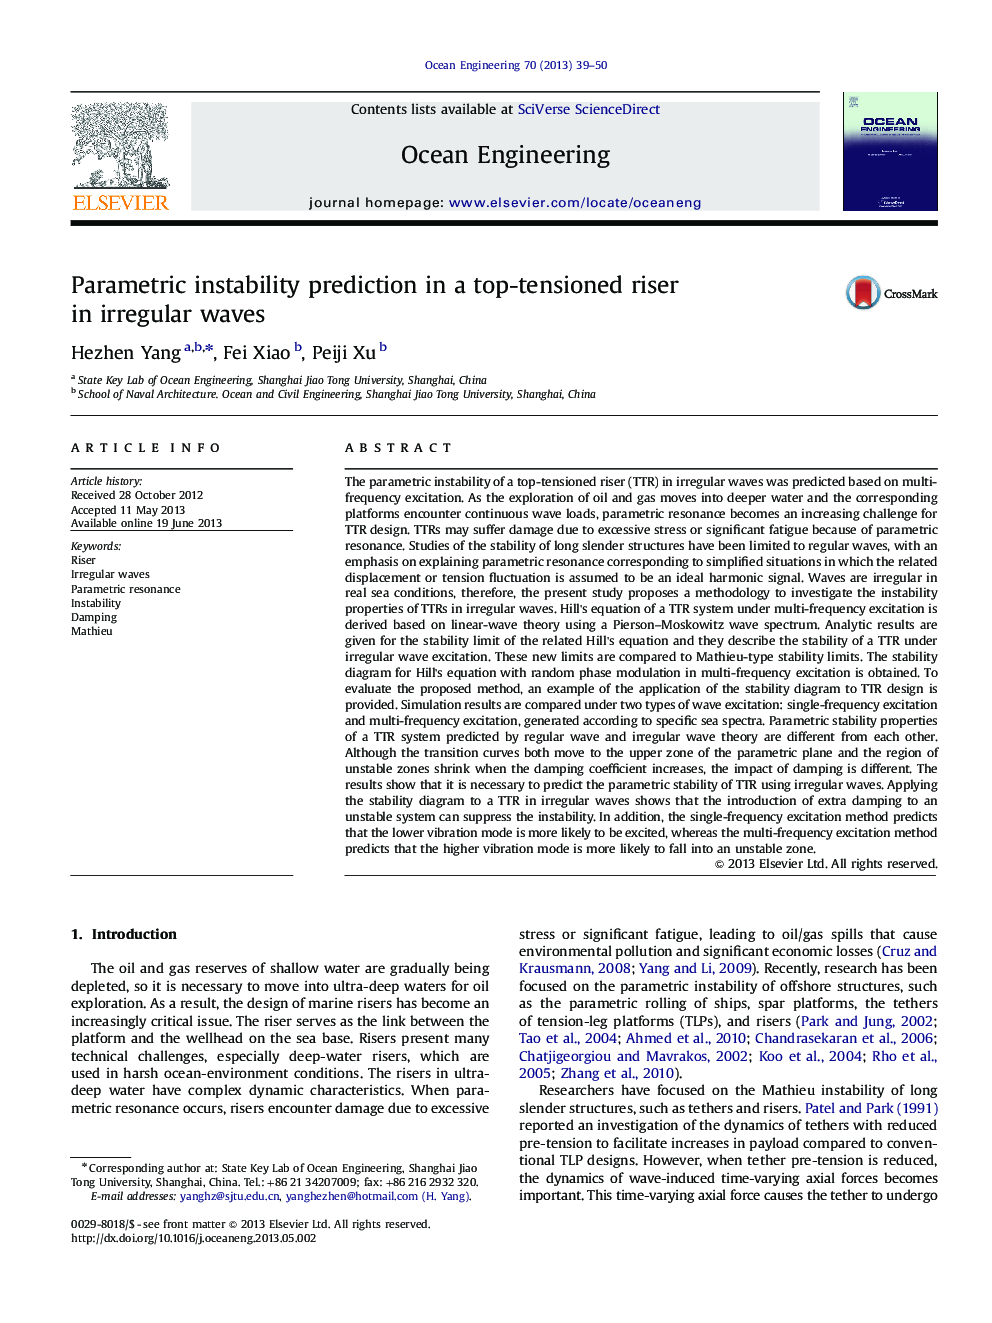 Parametric instability prediction in a top-tensioned riser in irregular waves